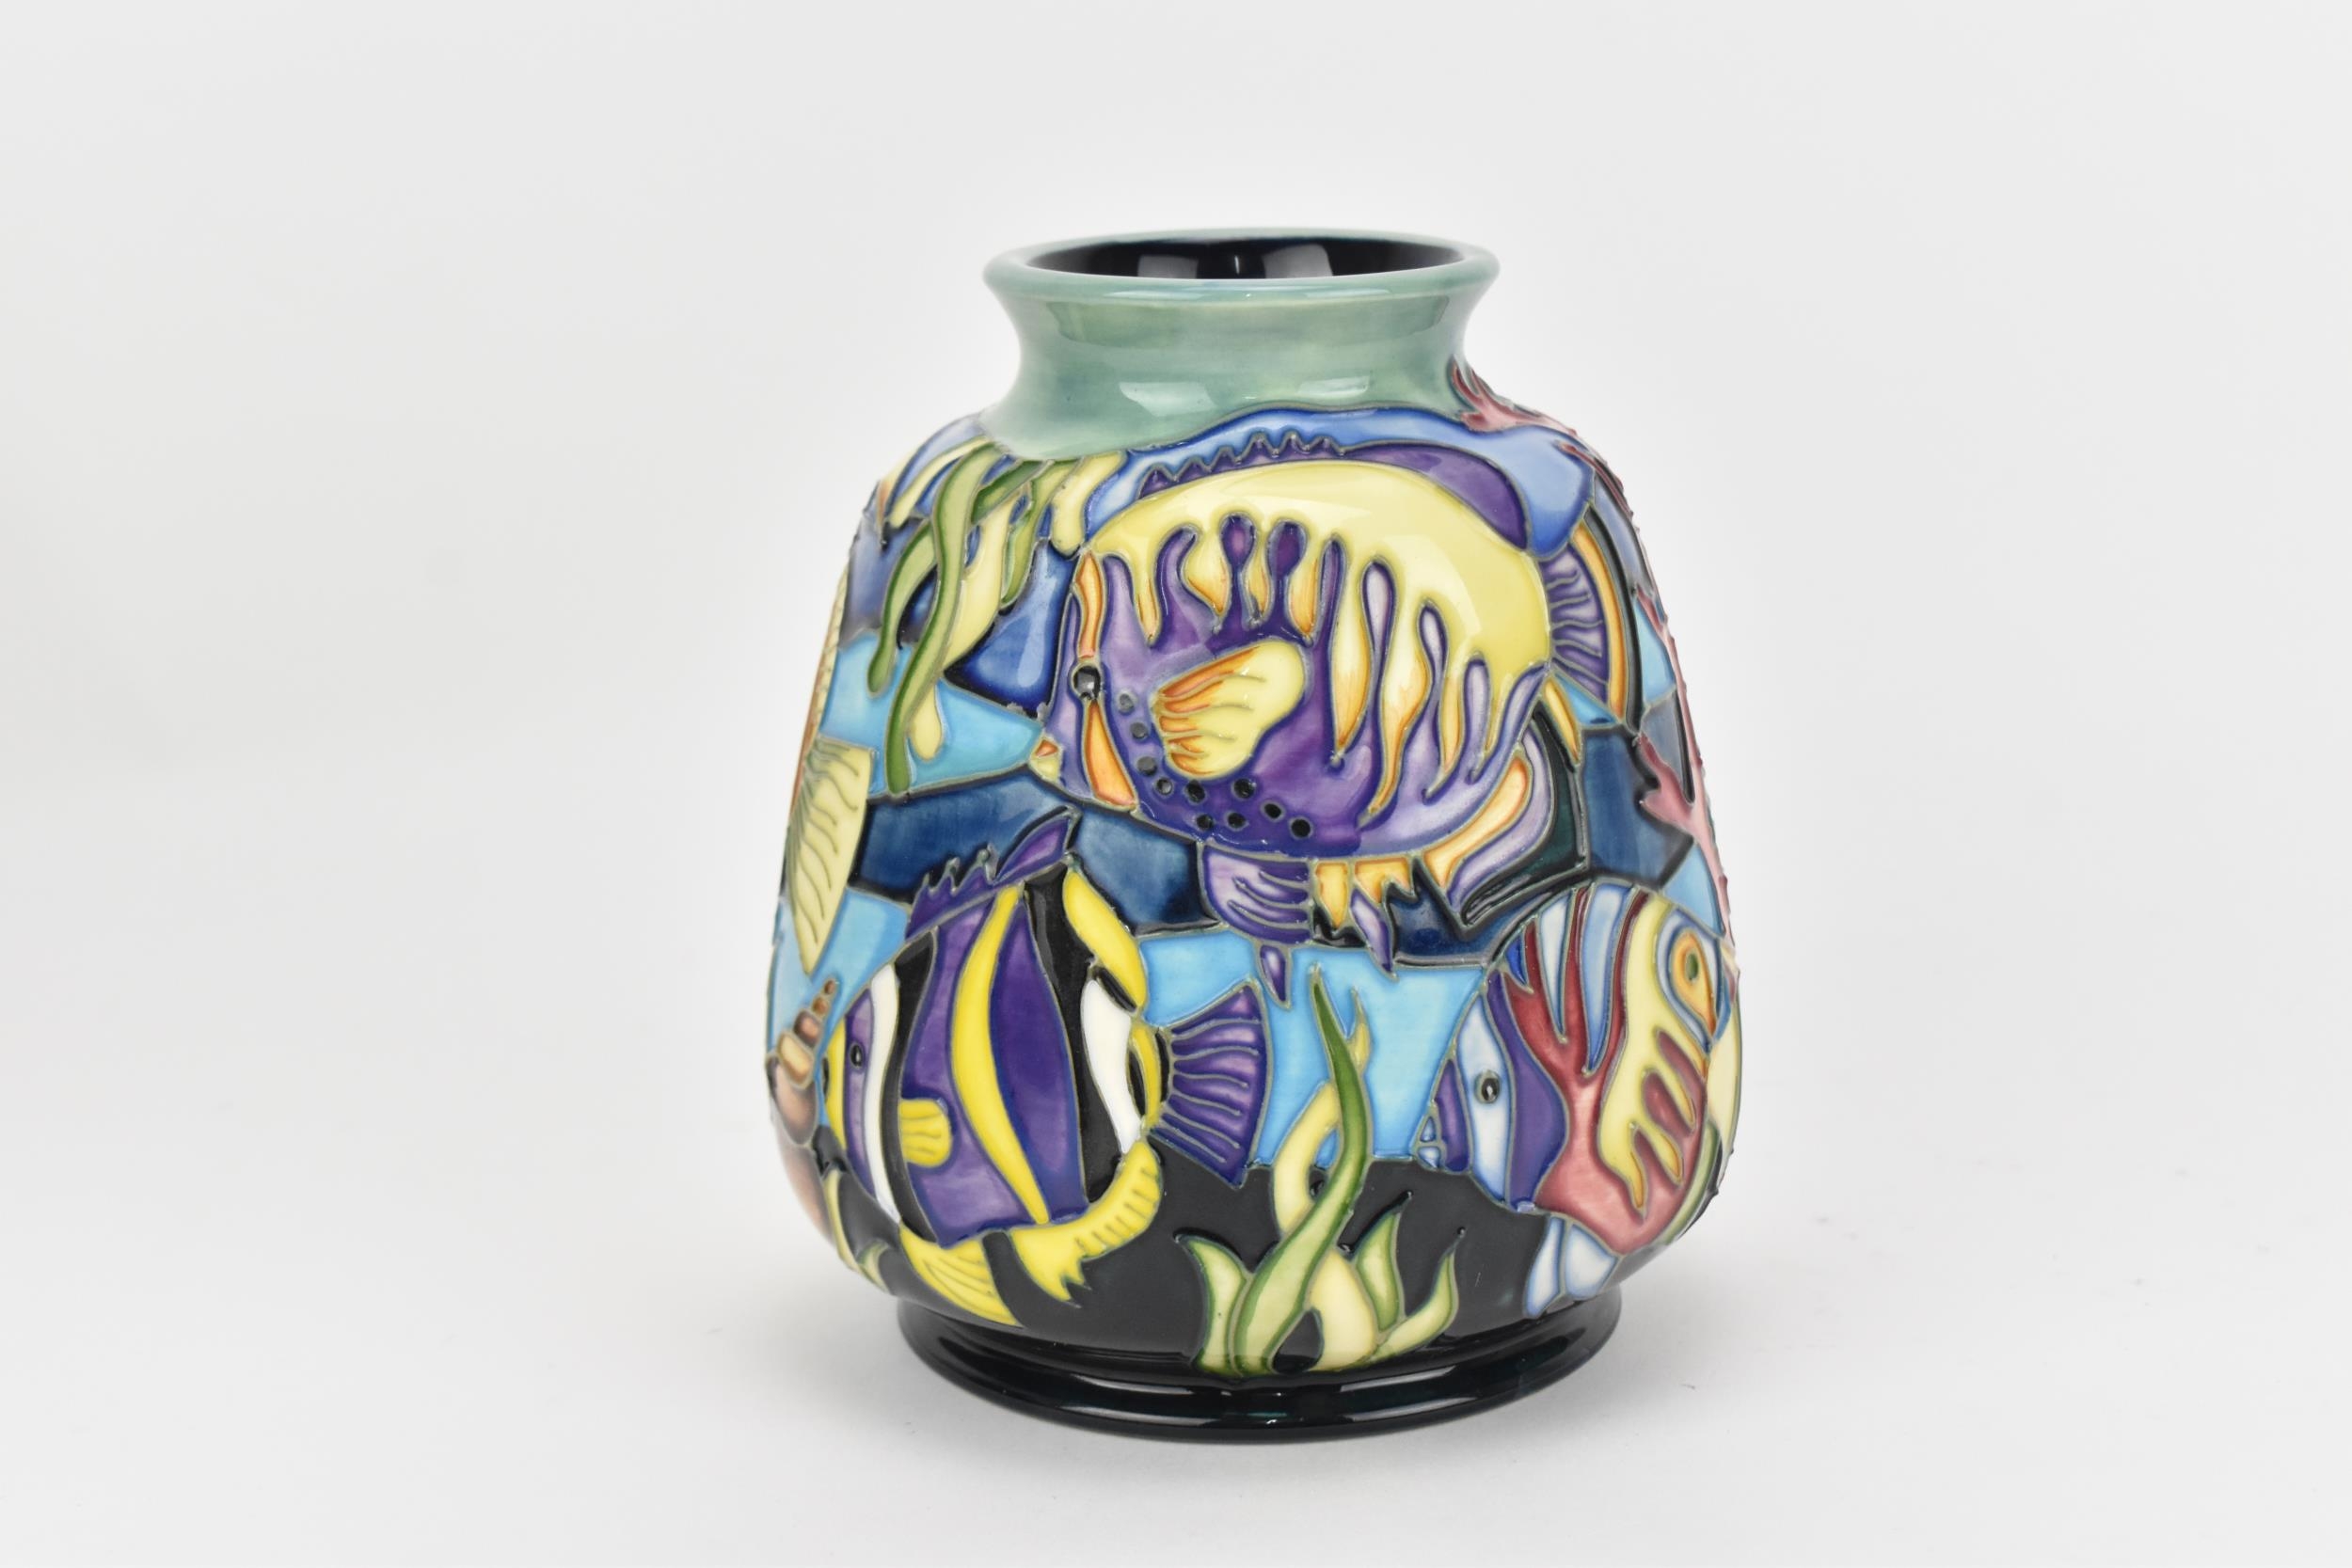 A Moorcroft Pottery vase in the 'Martinique' design by Jeanne McDougall, depicting coral reef - Image 2 of 5